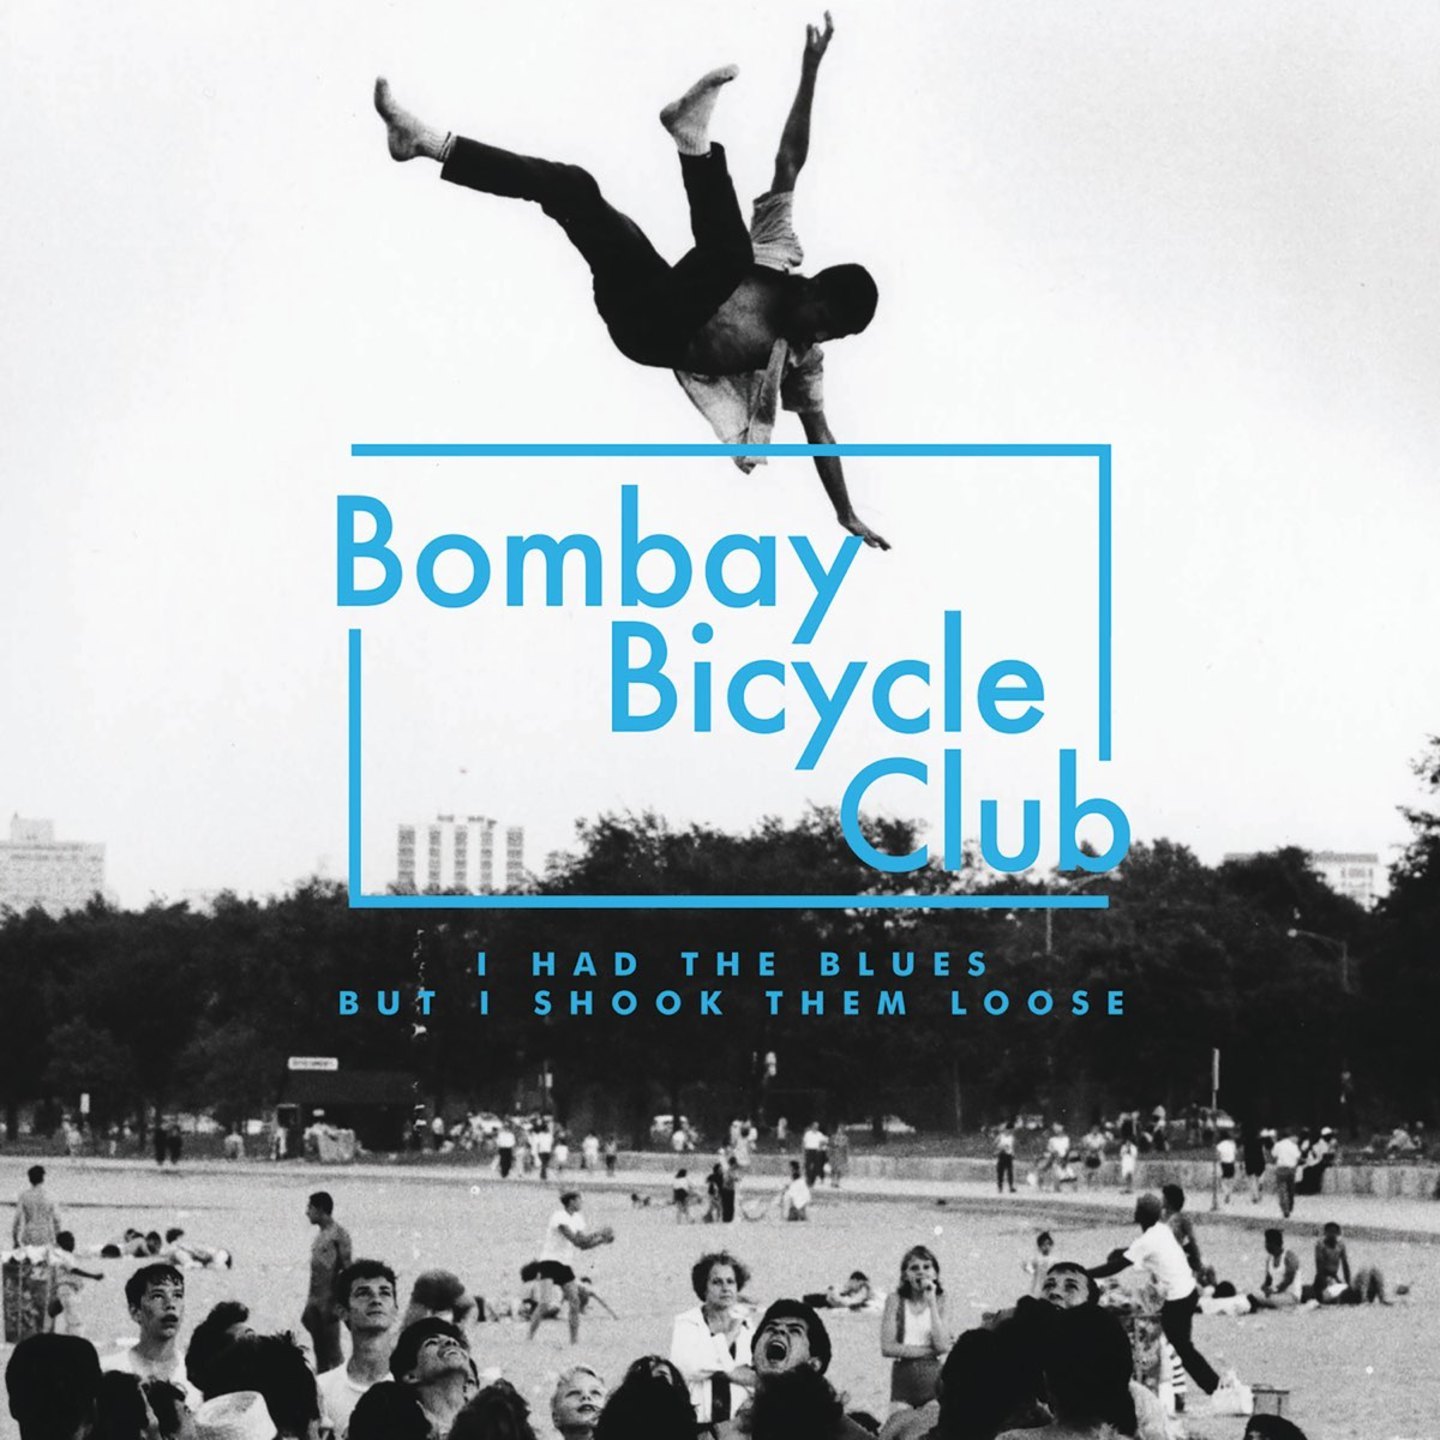 BOMBAY BICYCLE CLUB - I Had The Blues But I Shook Them Loose LP